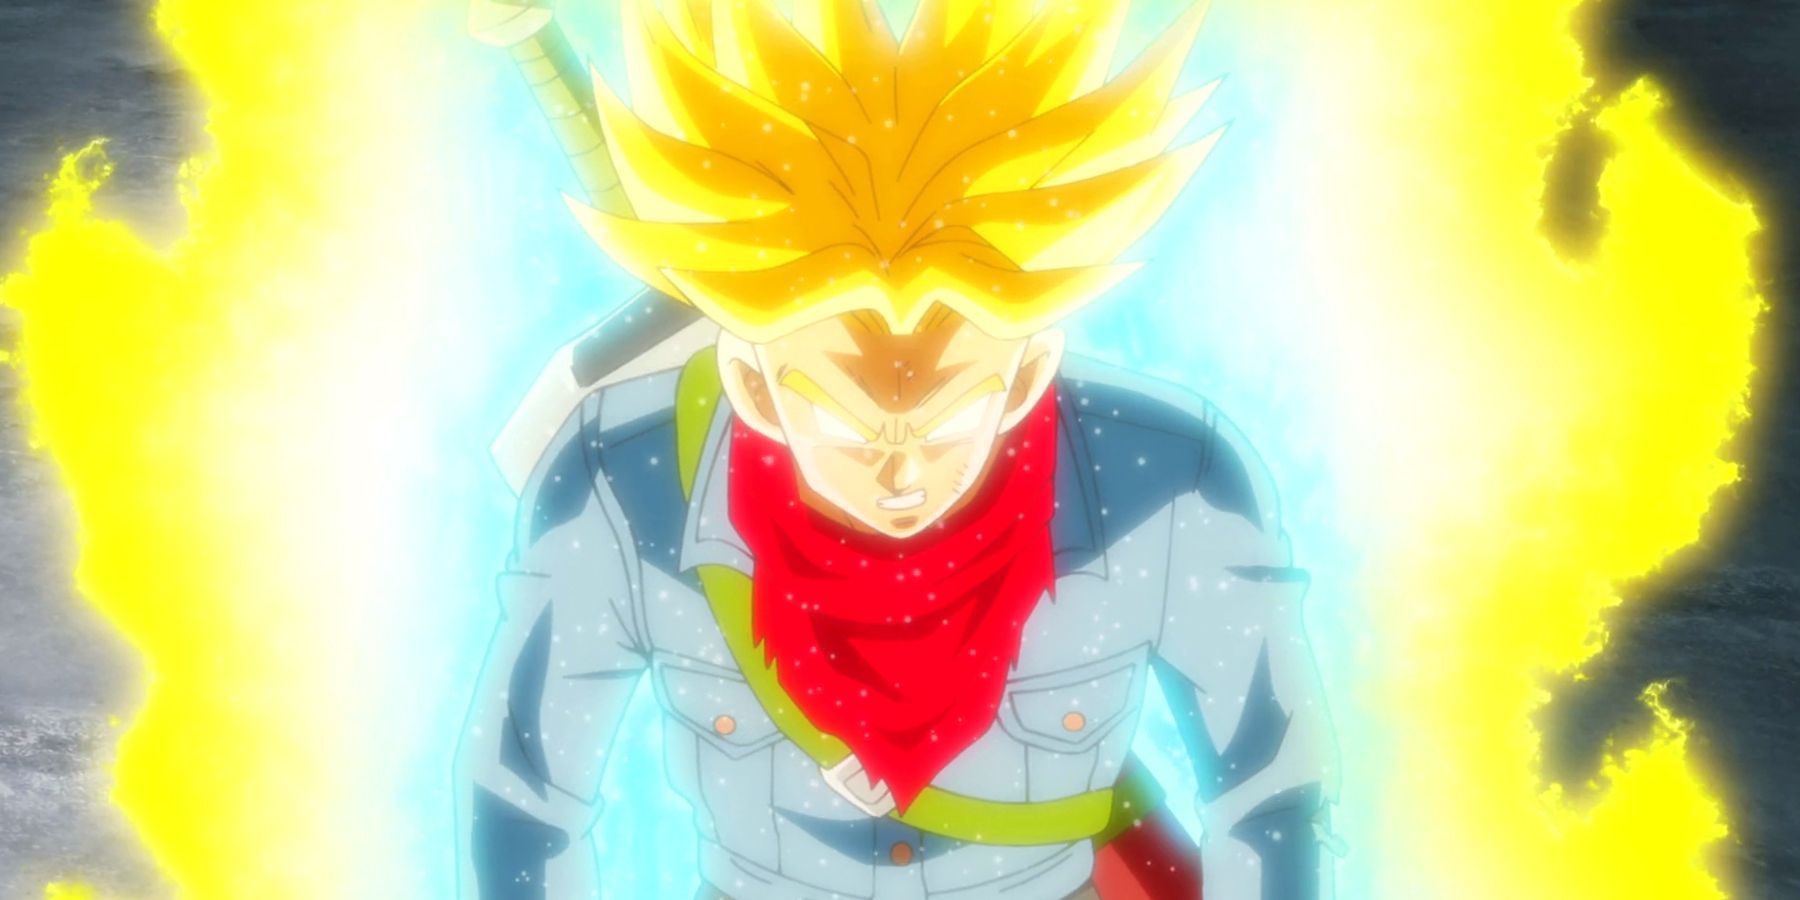 Future Trunks after achieving the Super Raiyan Rage form in Dragon Ball Super.